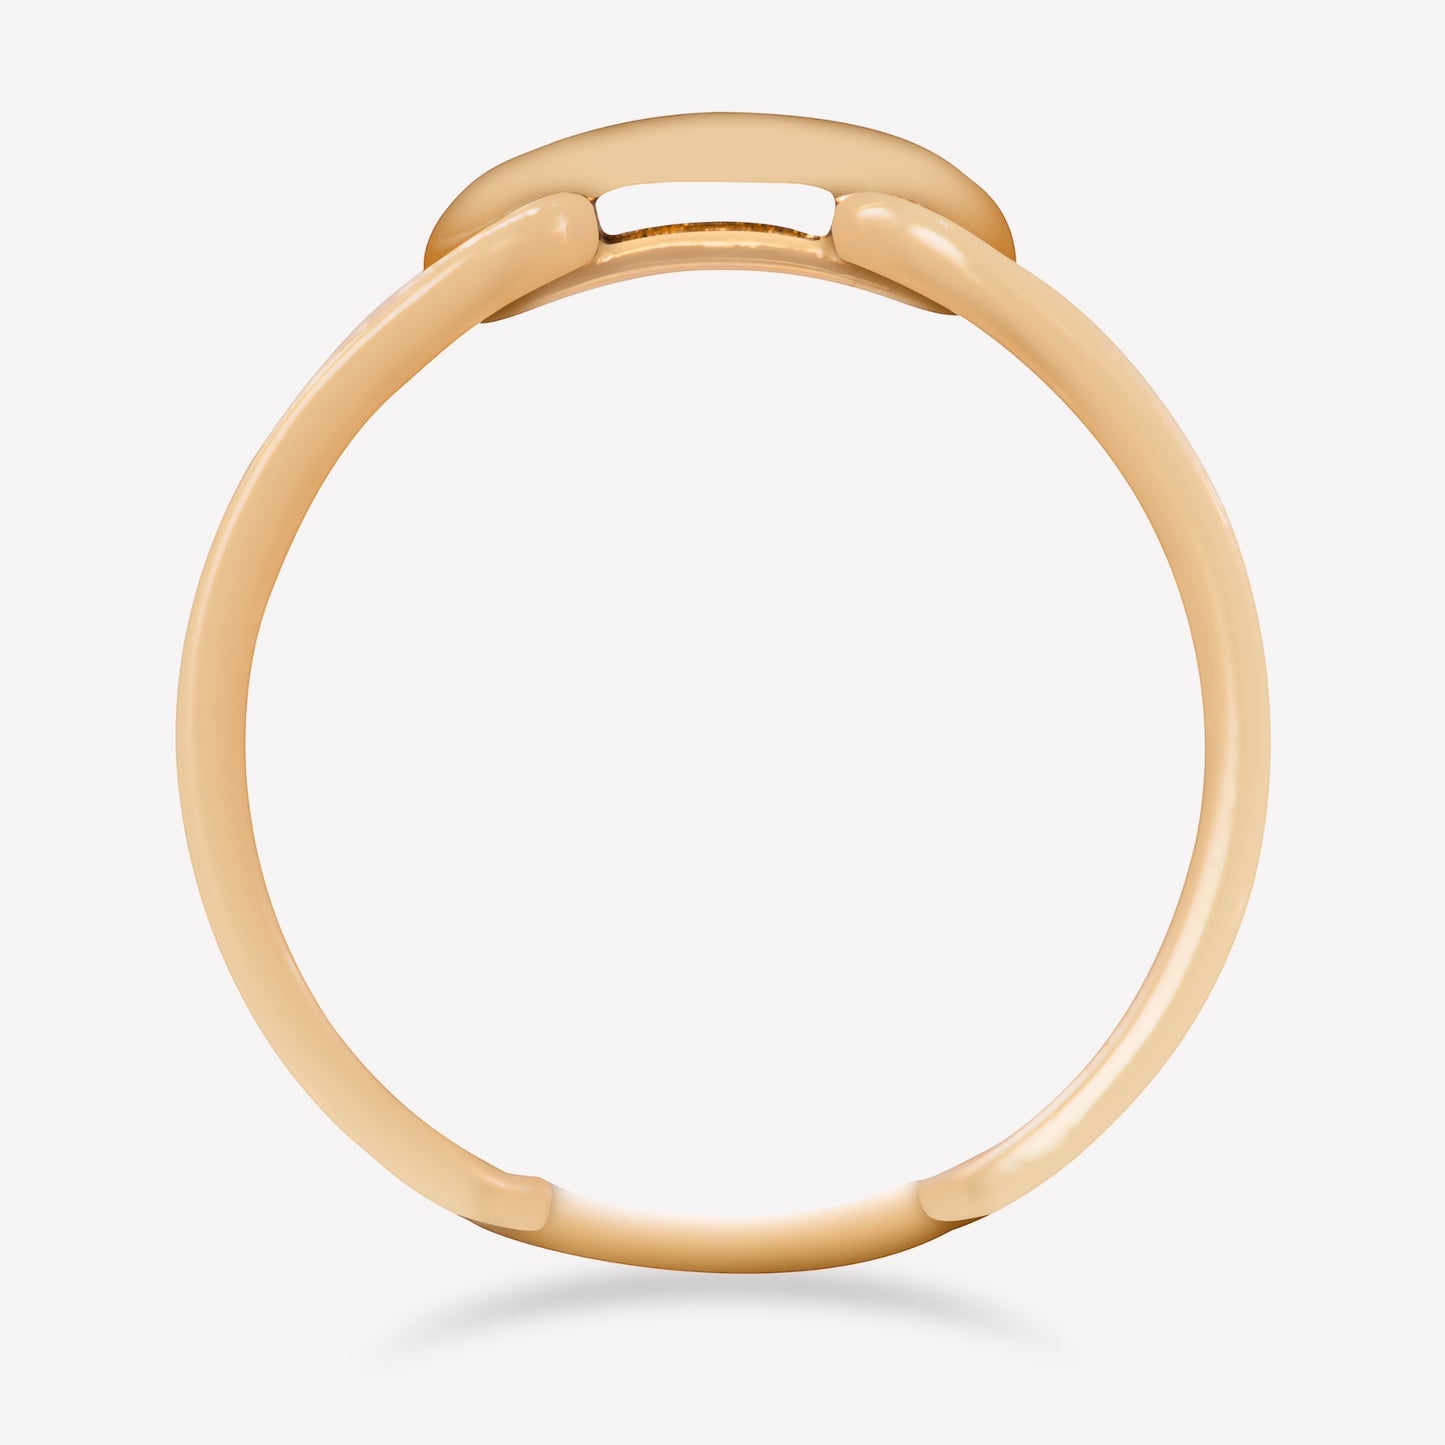 Links Deluxe Yellow Gold Diamond Ring